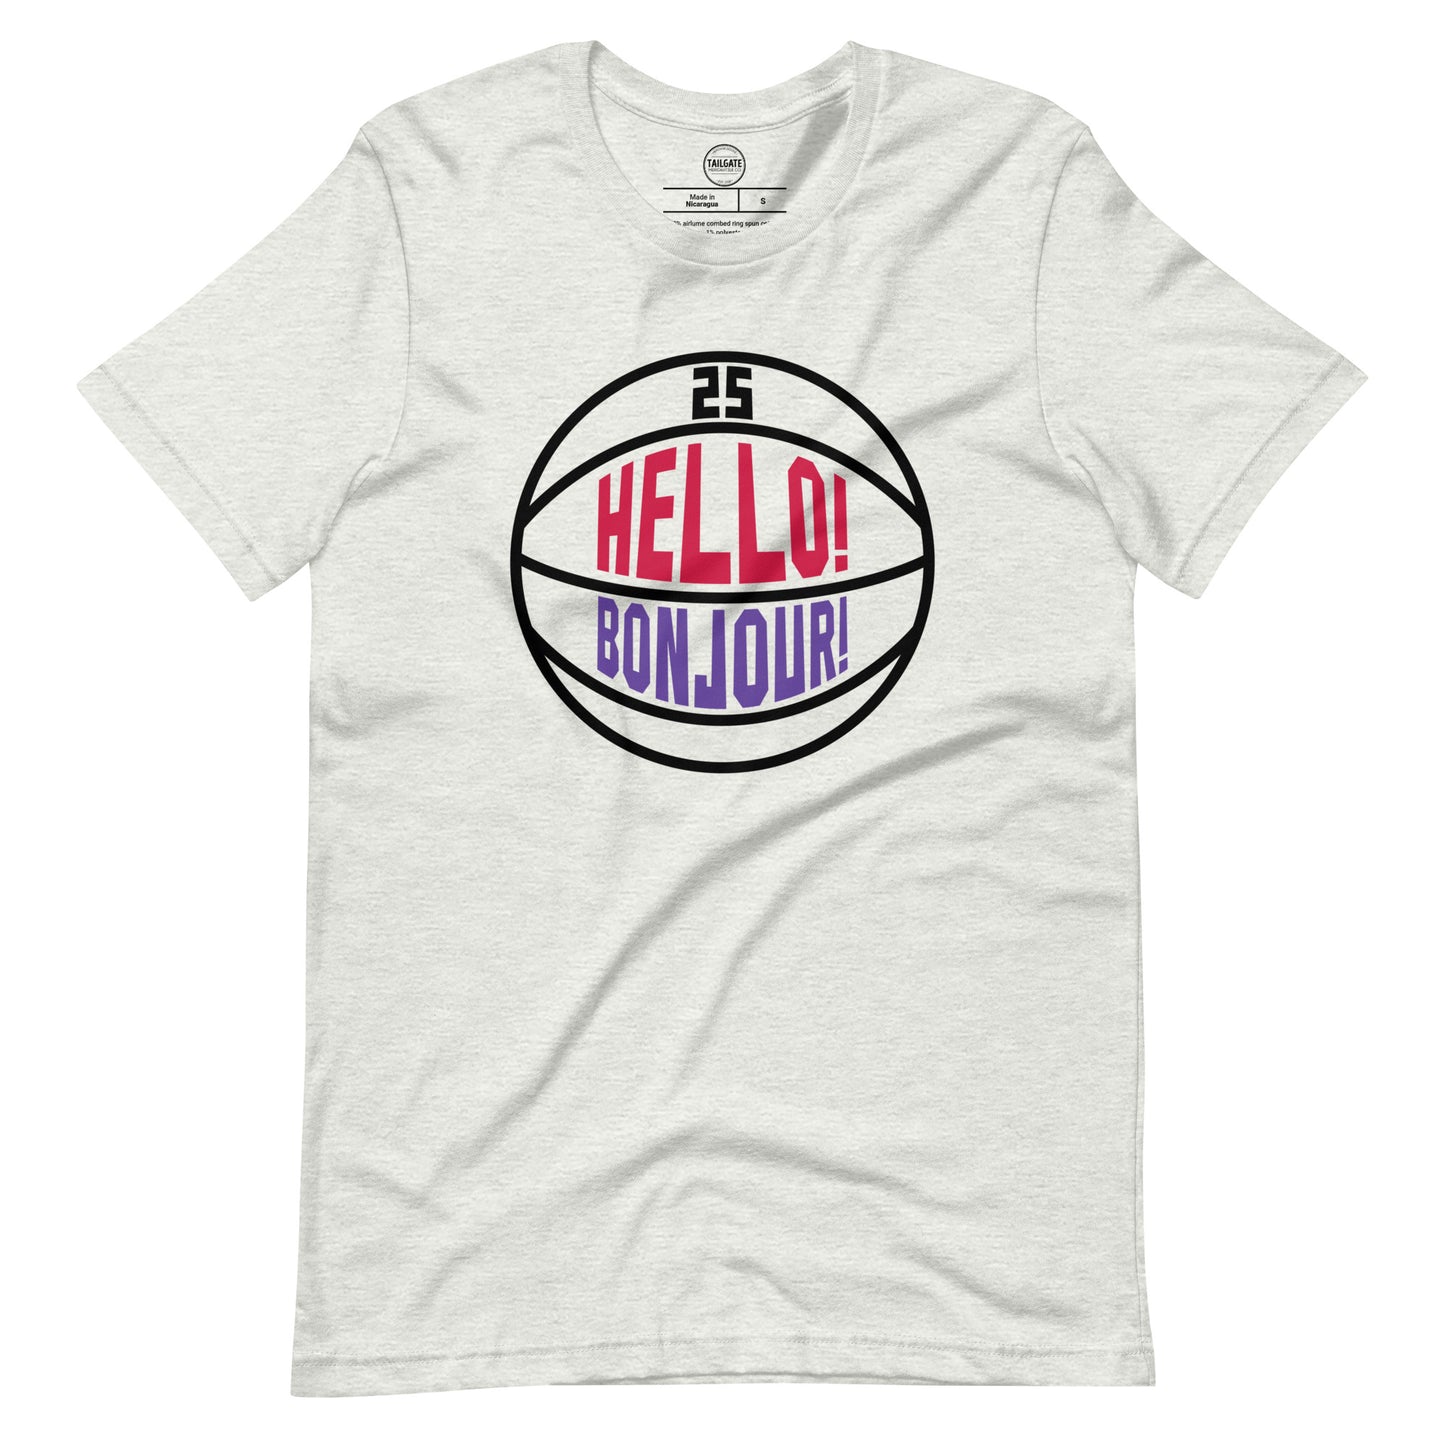 This image details the graphic design "Hello! Bonjour!". In the image, the words are built into a basketball and feature Chris Boucher's number 25. The Toronto Raptors' announcer, Jack Armstrong, loves to shout out Hello! Bonjour! when Chris Boucher does something exciting on the court. The tee is heather ash and the design is black/red/purple similar to the Toronto Raptors retro colours. This item is exclusive to tailgate mercantile and is available only online.